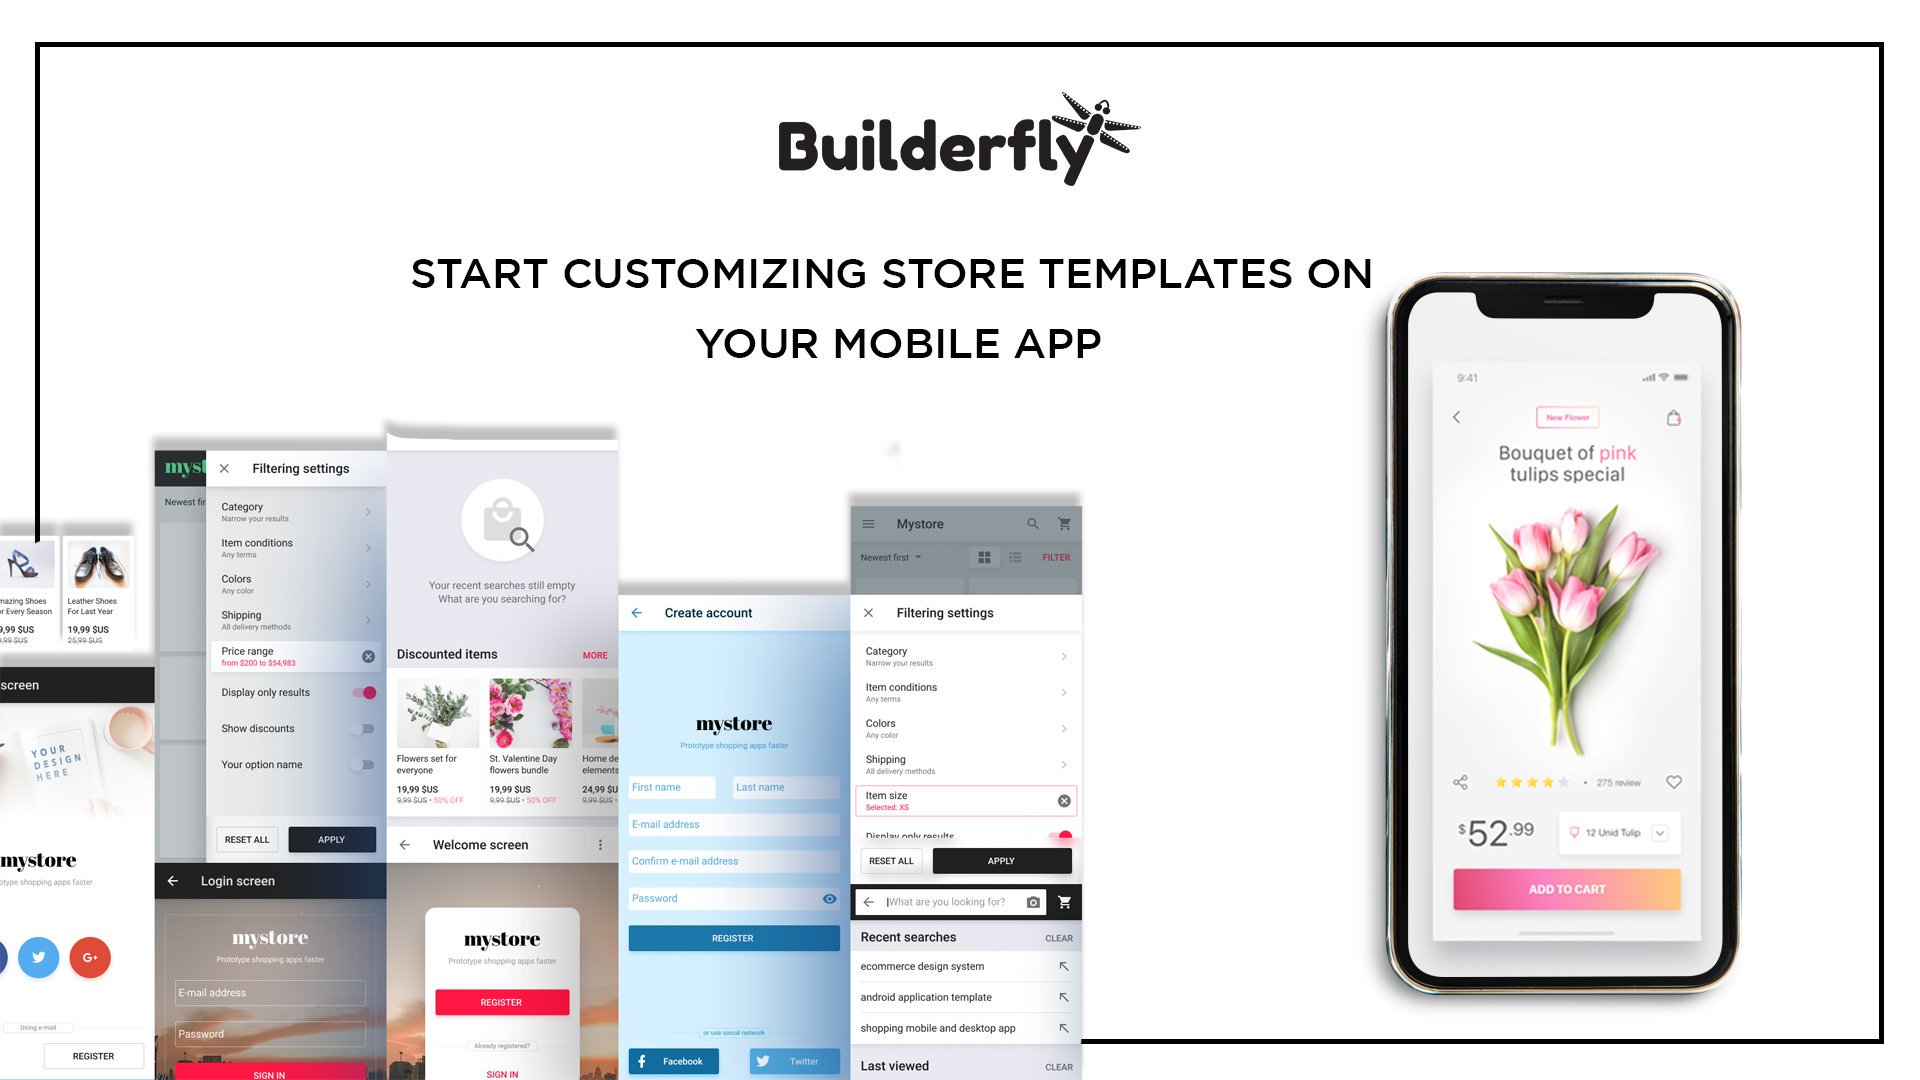 With BuilderFly Mobile App, Template customization is easy and requires no coding skills.